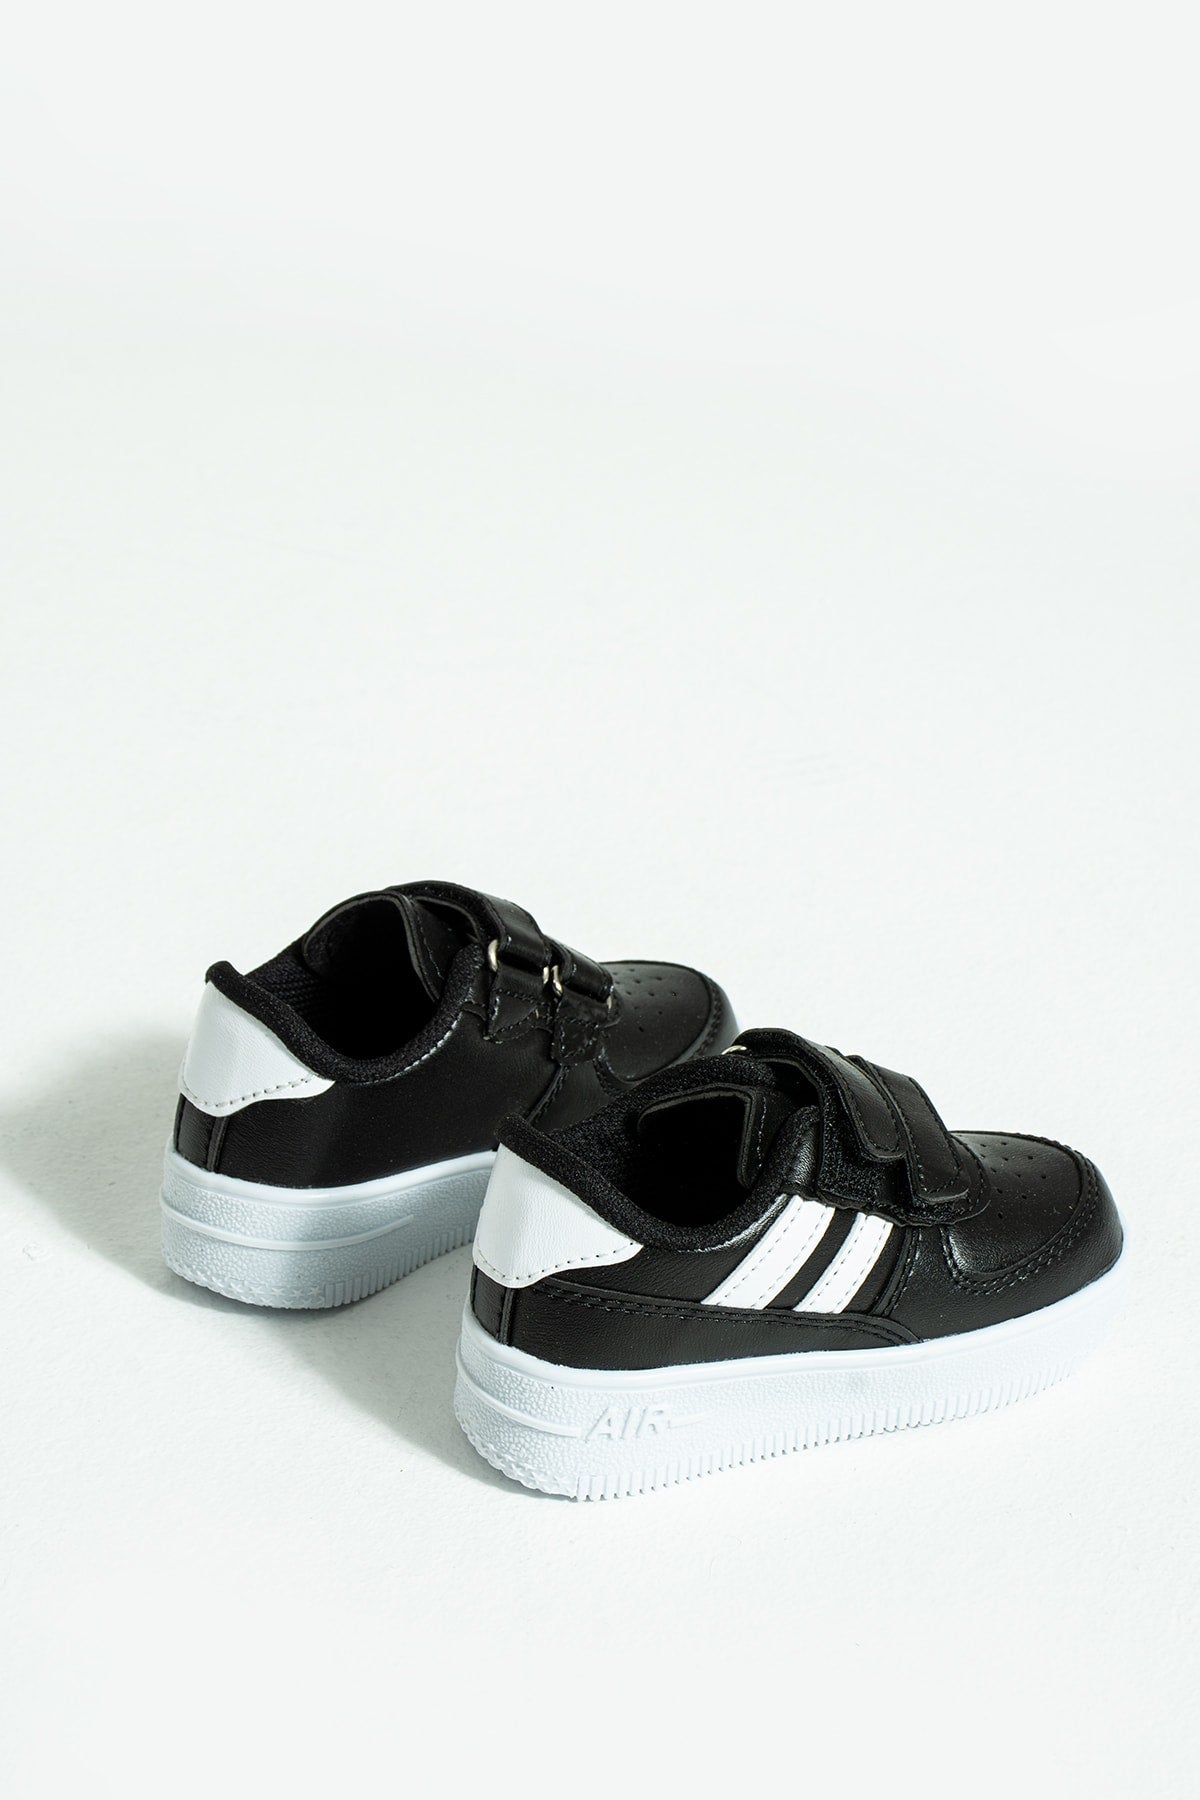 Kids Black and White Sneakers Velcro Kids Shoes